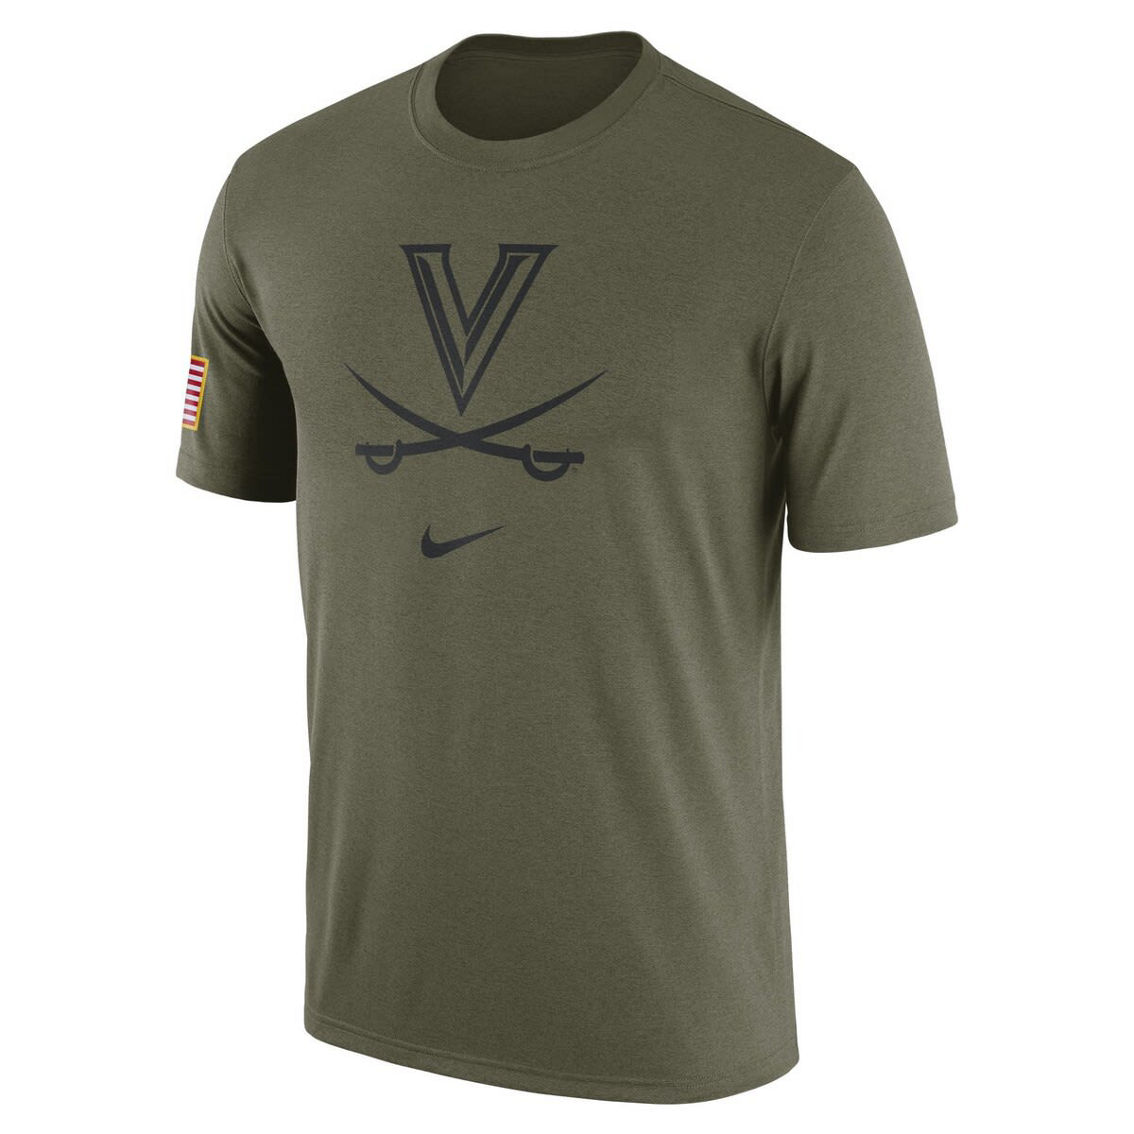 Nike Men's Olive Virginia Cavaliers Military Pack T-Shirt - Image 3 of 4